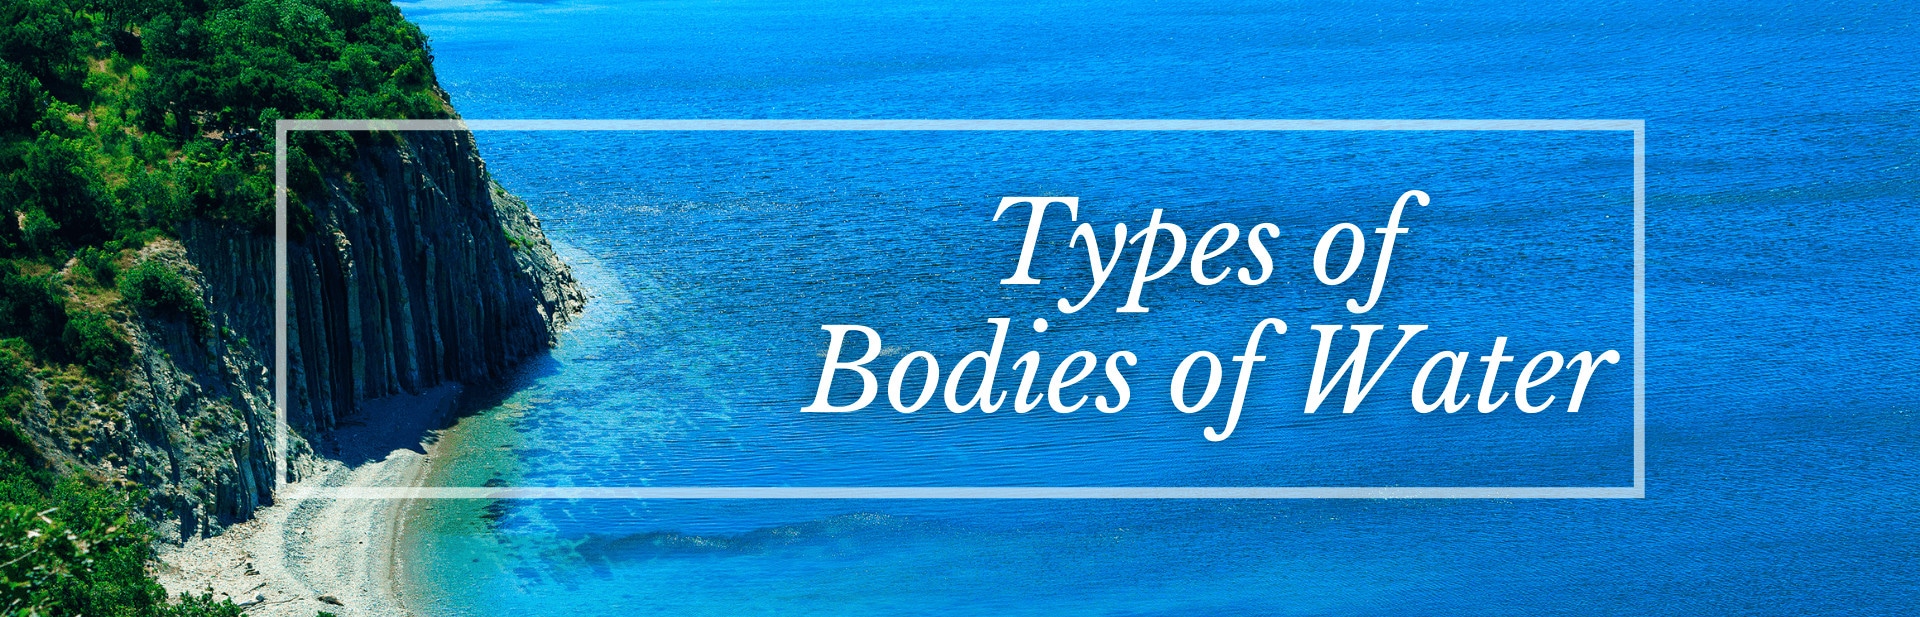 47 Types of Bodies of Water: Pictures and More